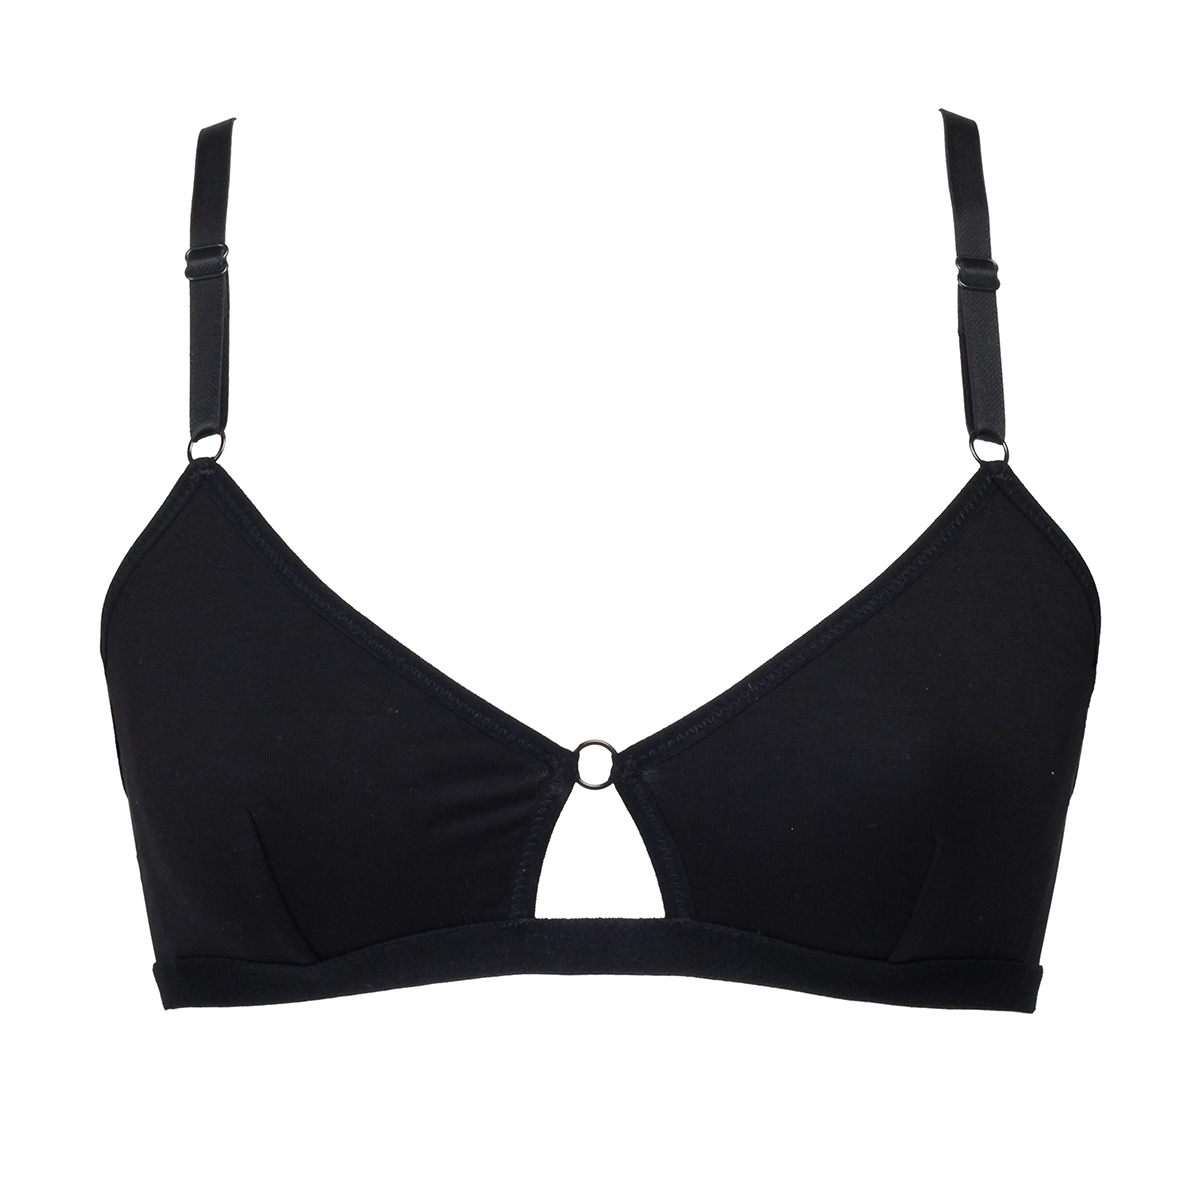 Black mesh and jersey bralette by Flash you and me Lingerie